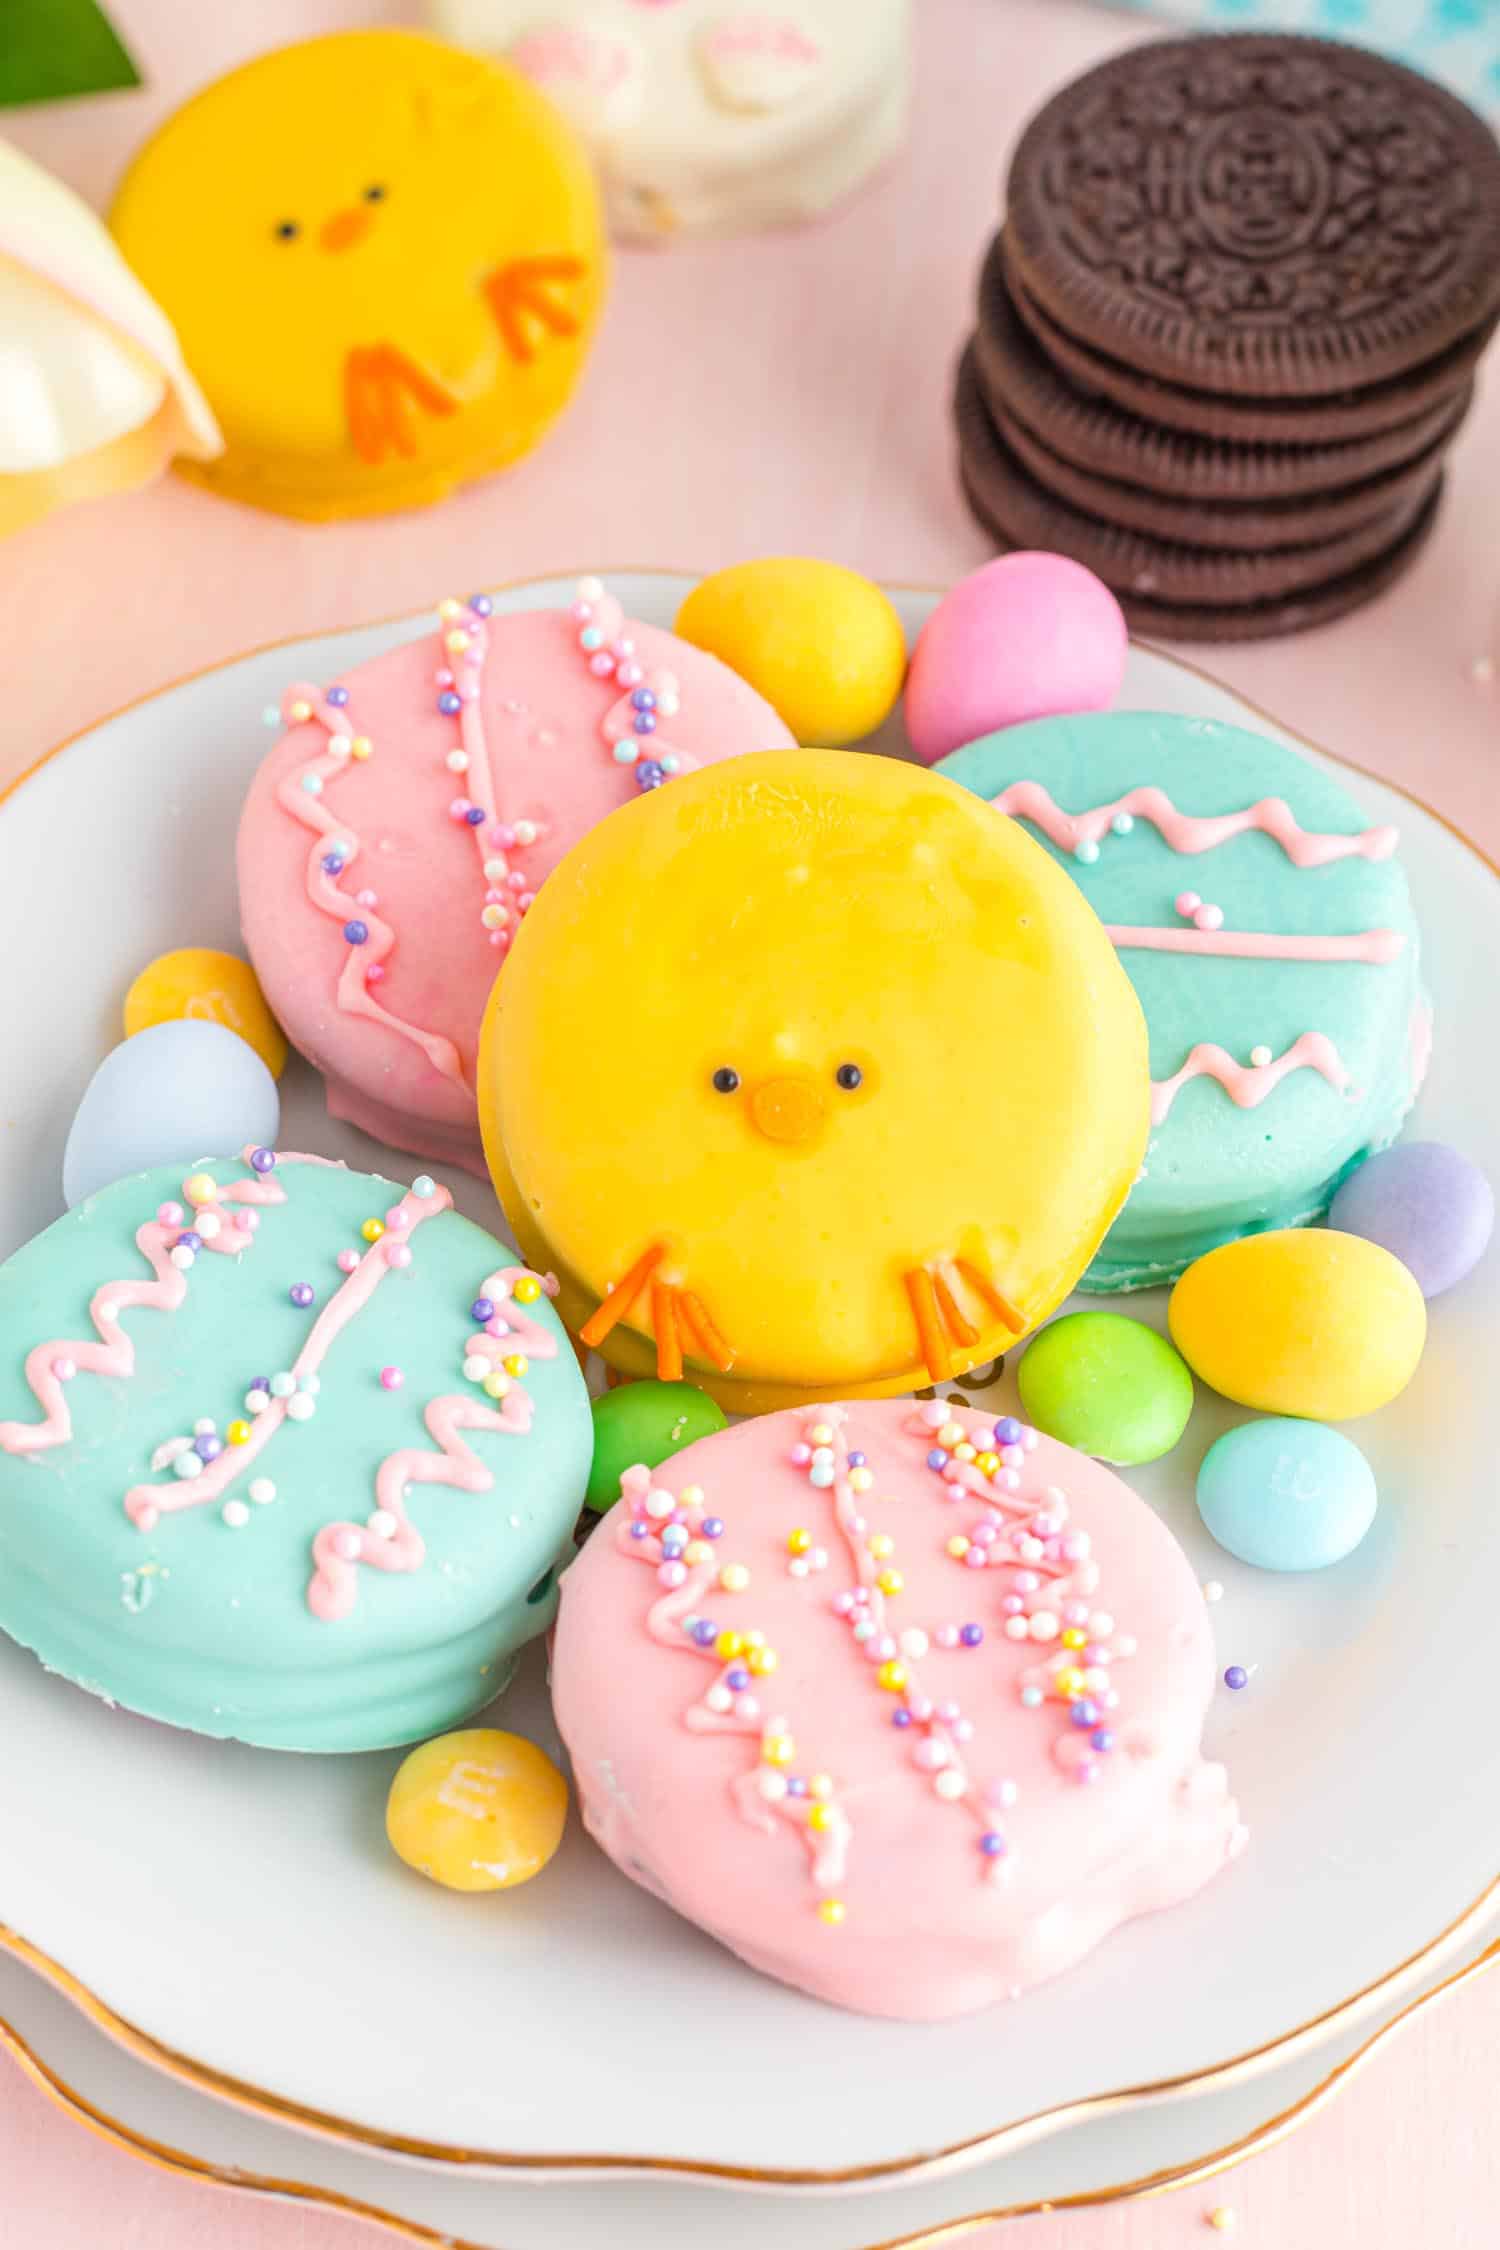 Platter of colorful Easter themed decorated Oreo cookies